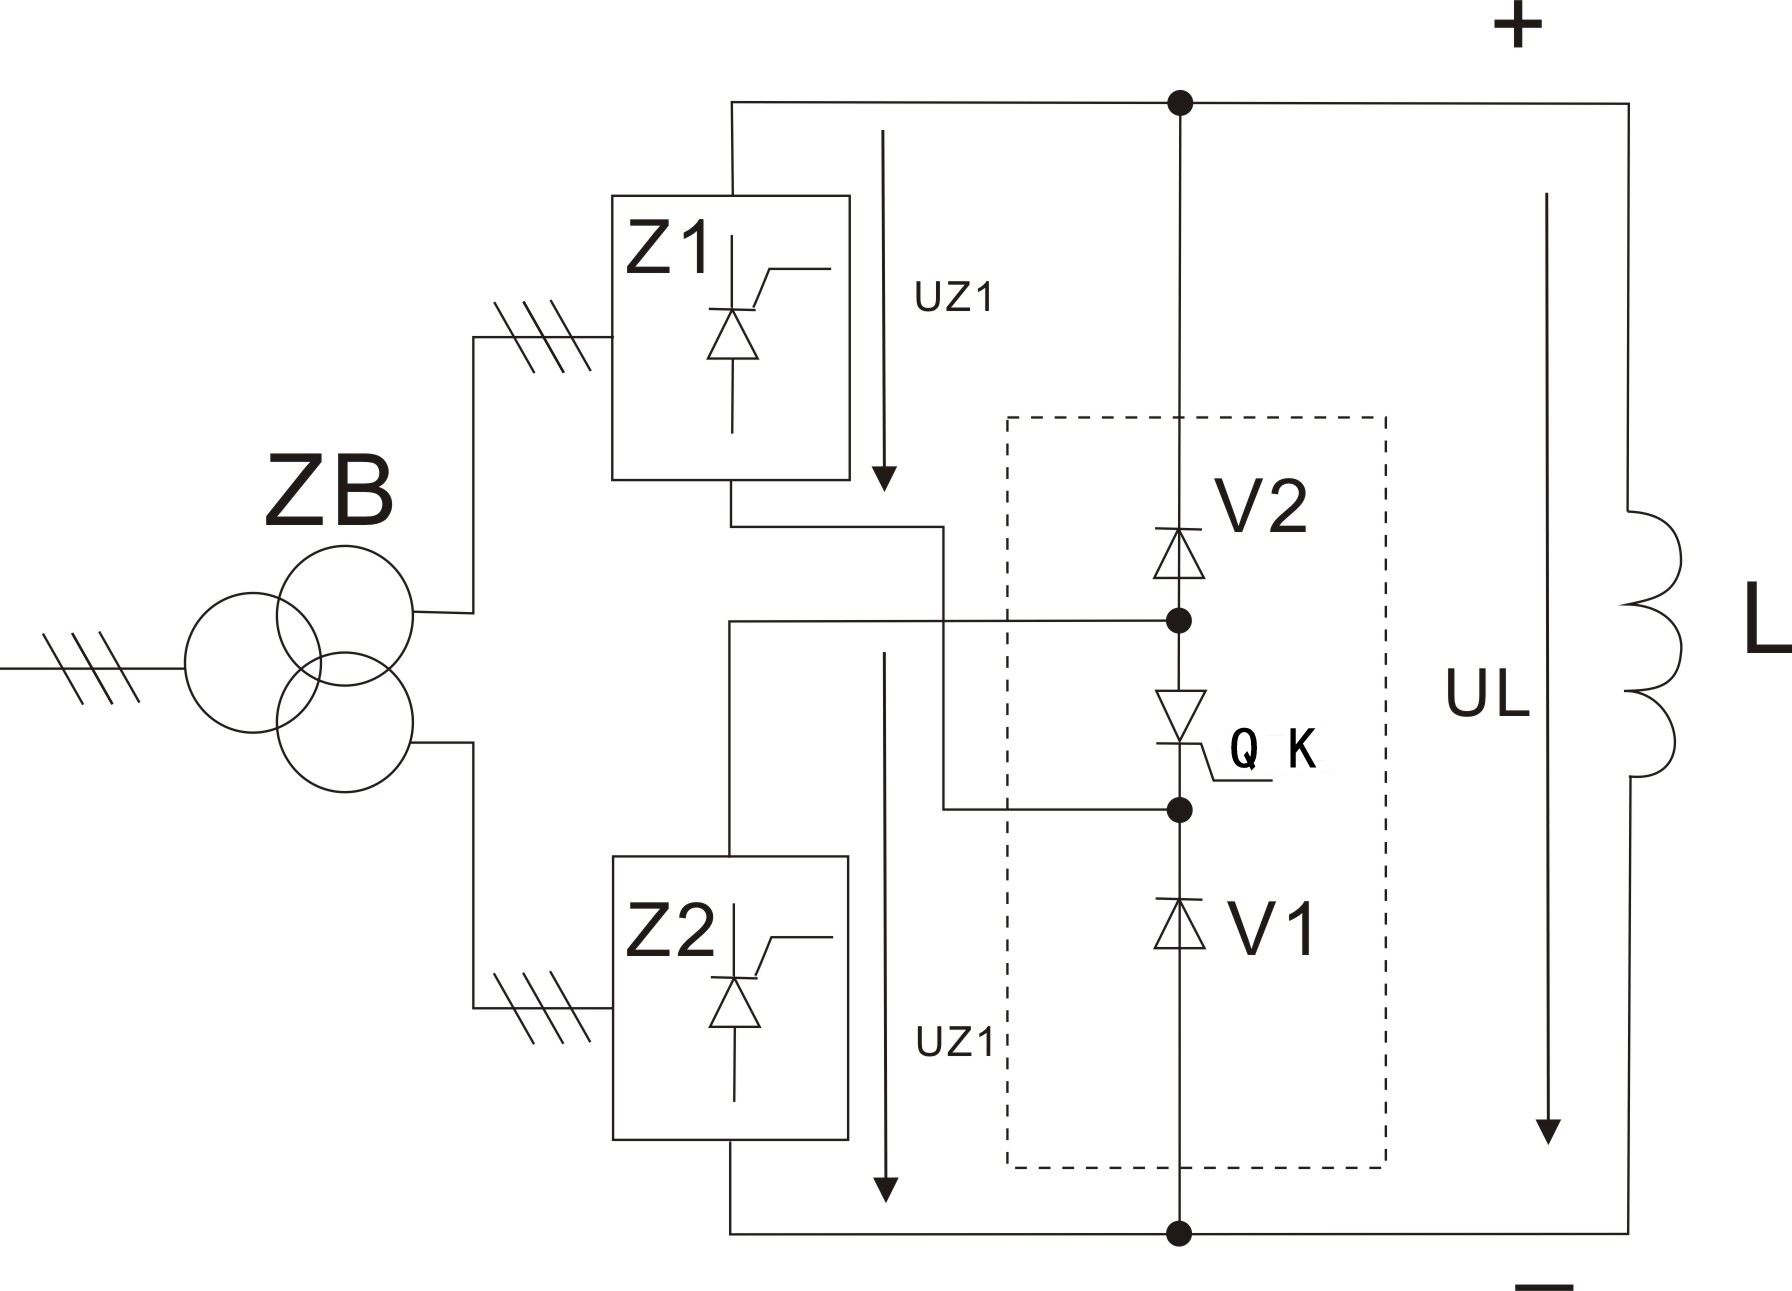 Generator accident reinforced excitation circuit